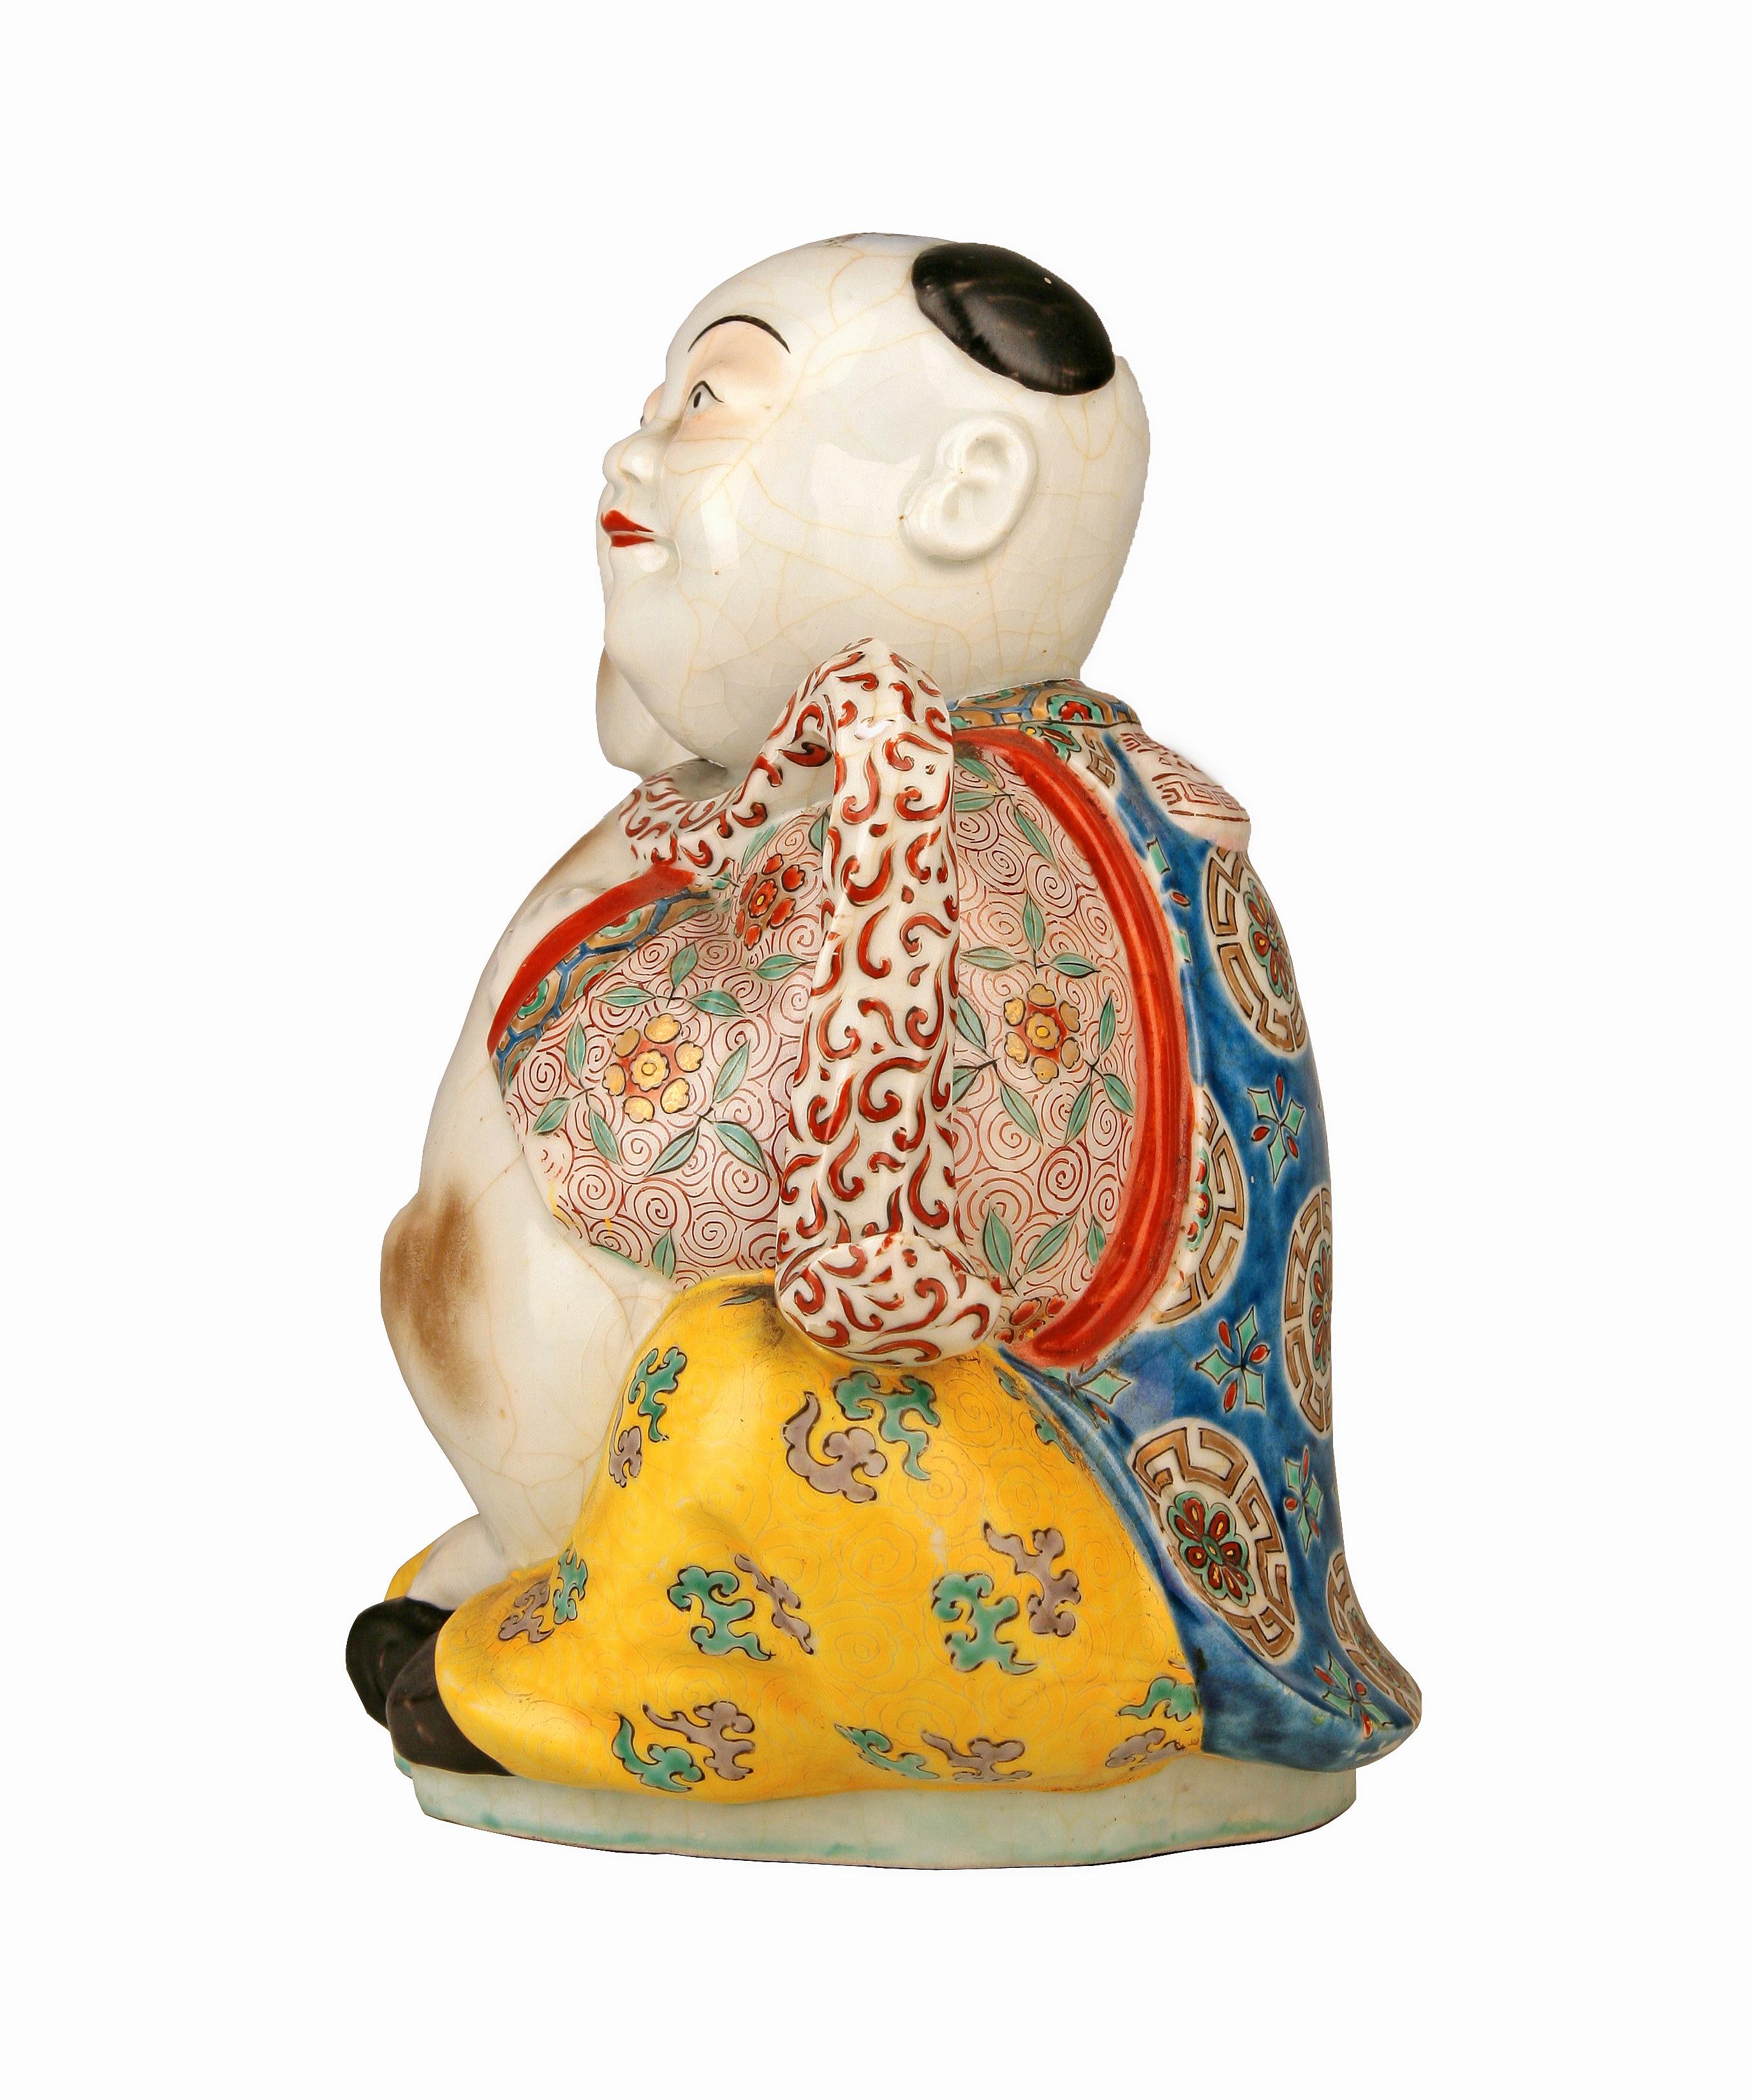 Chinese 19th Century/Qing Dinasty Glazed Hand-Painted Porcelain Man and Dog Figurine For Sale